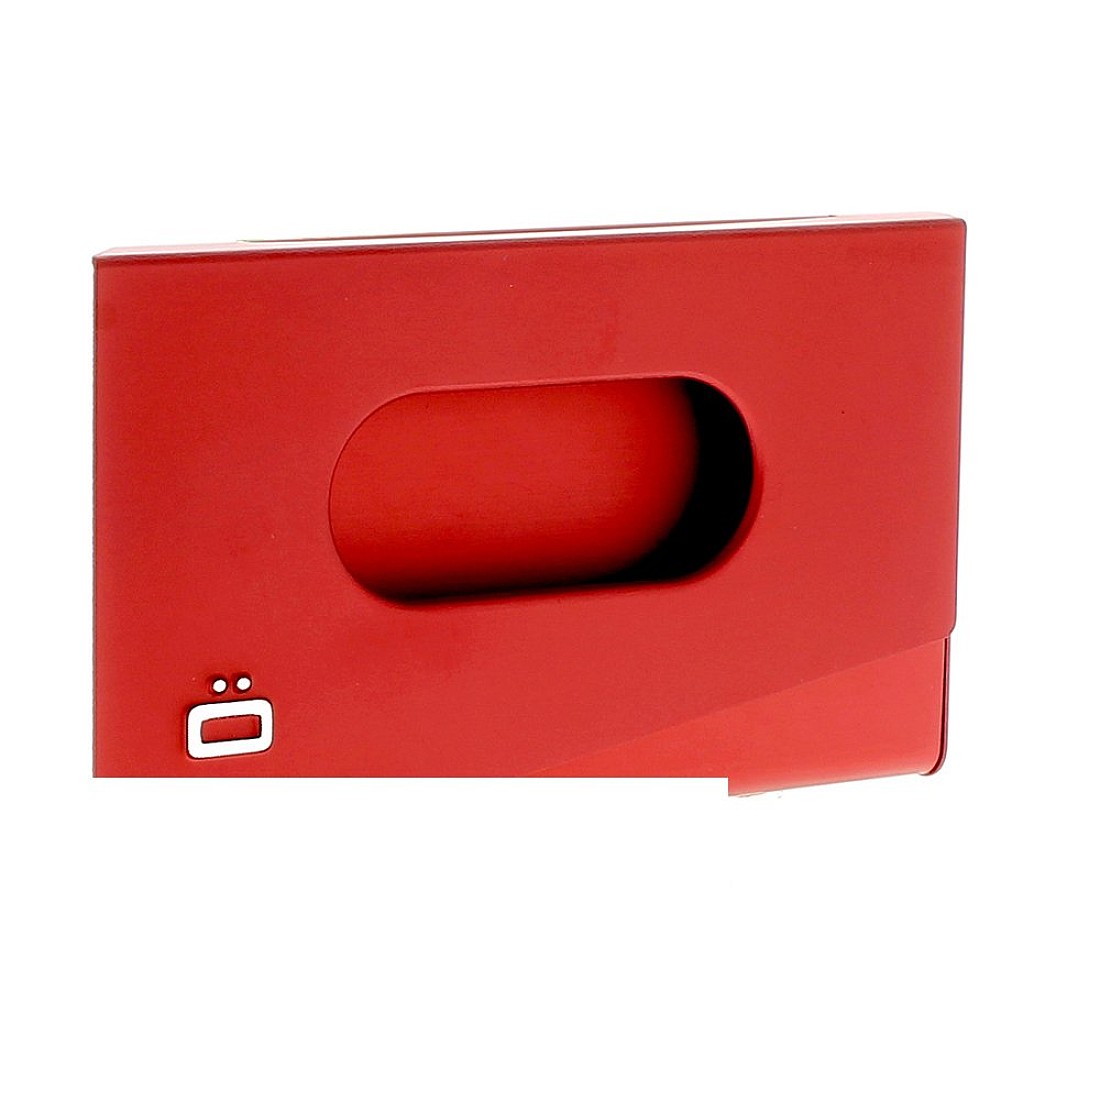 Ögon Designs One Touch Red Business Card Holder